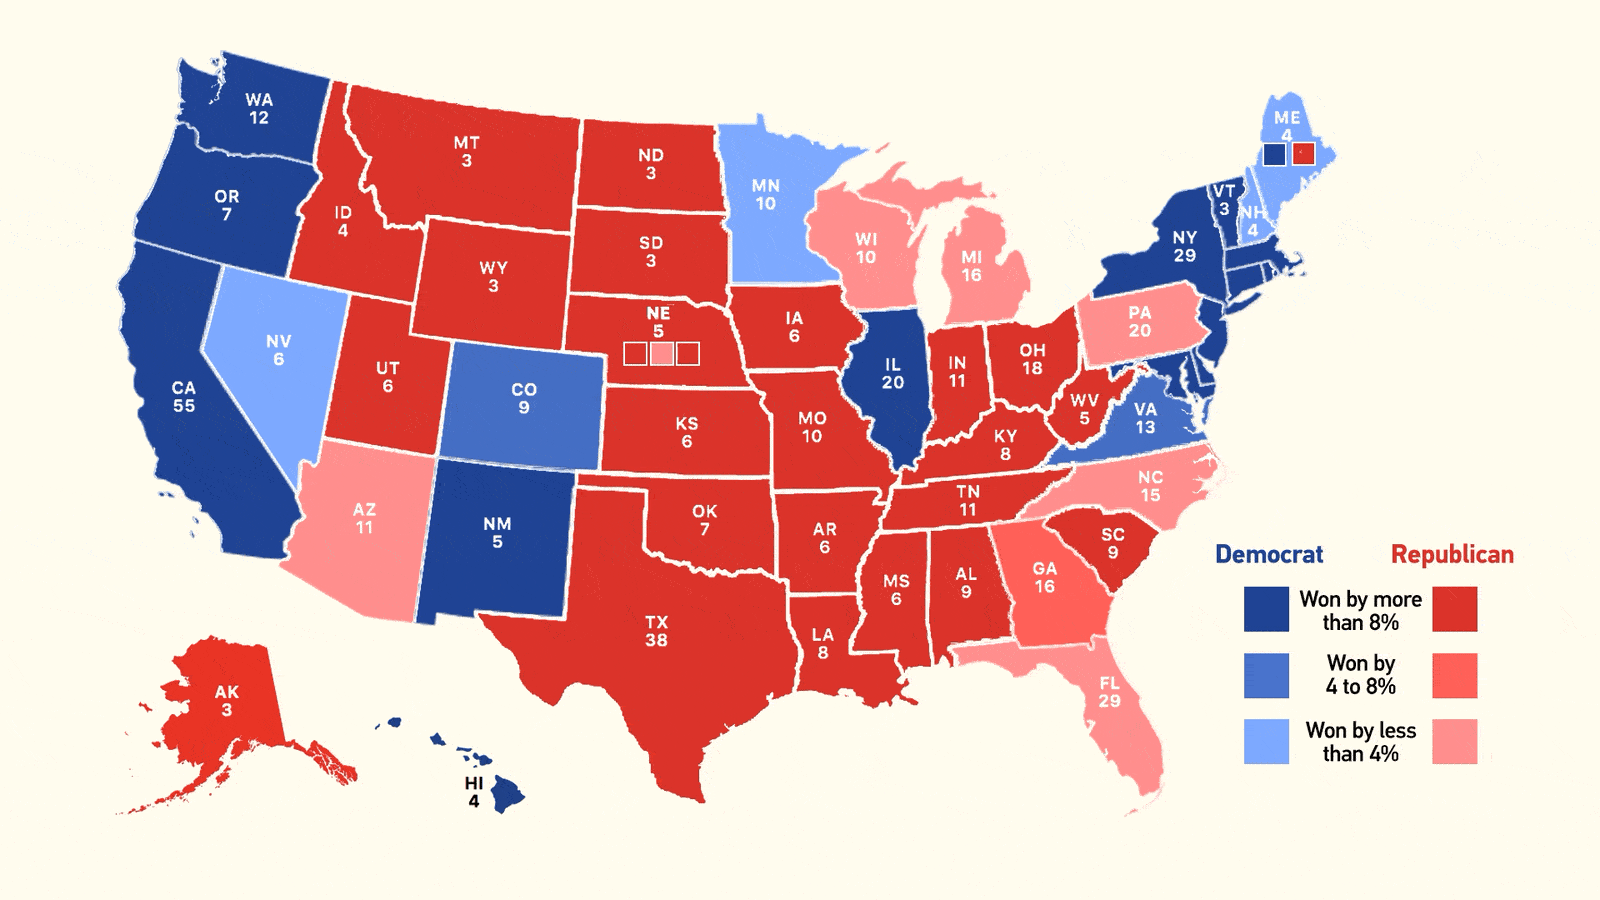 Behind U.S. elections: Why are red states turning blue?